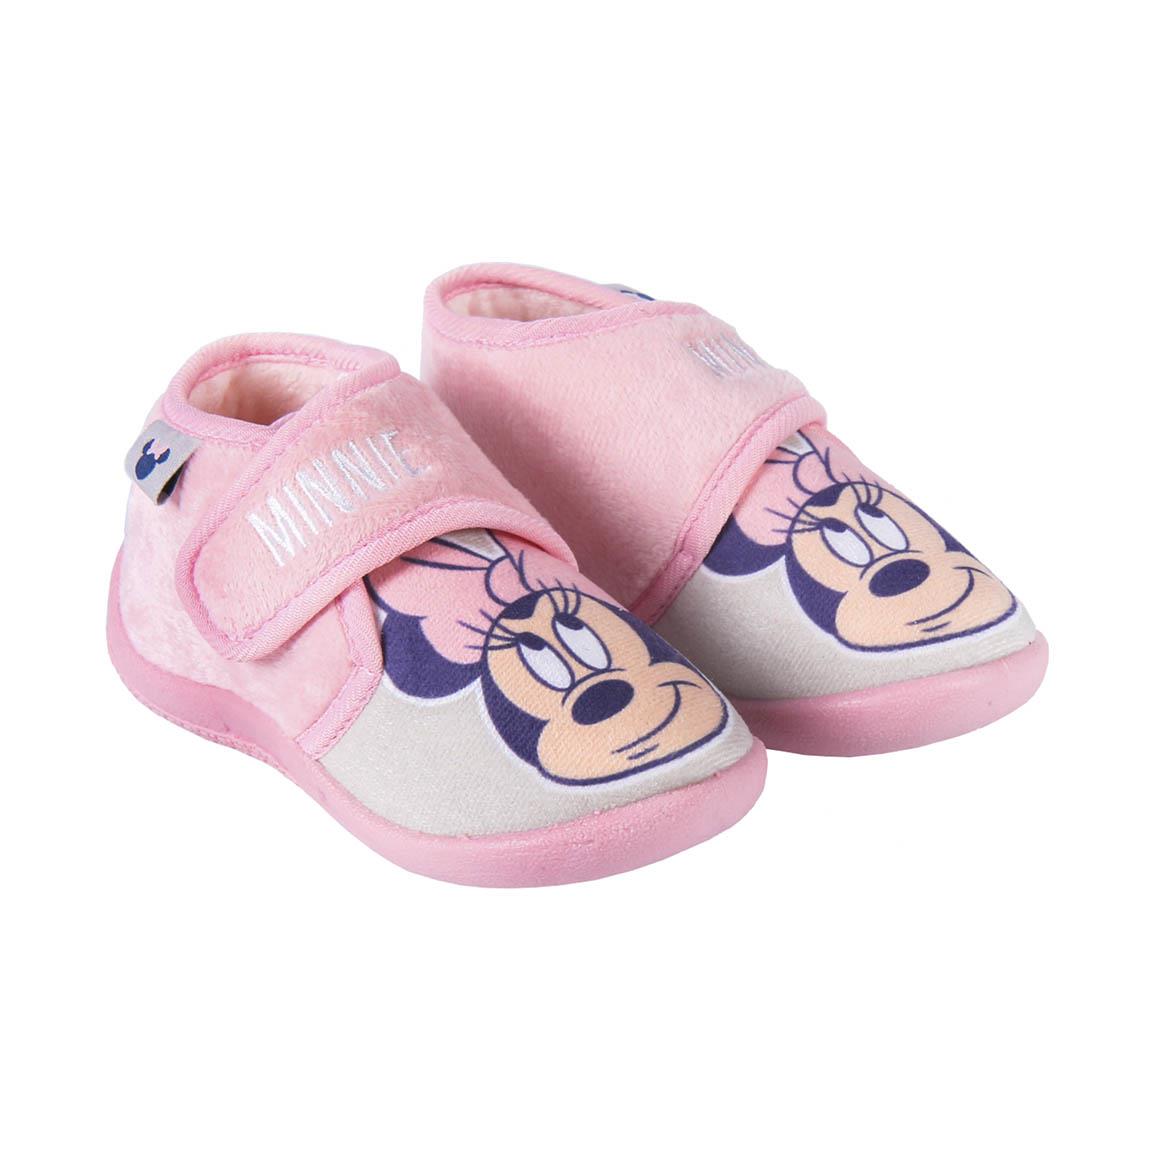 HOUSE SLIPPERS HALF BOOT MINNIE